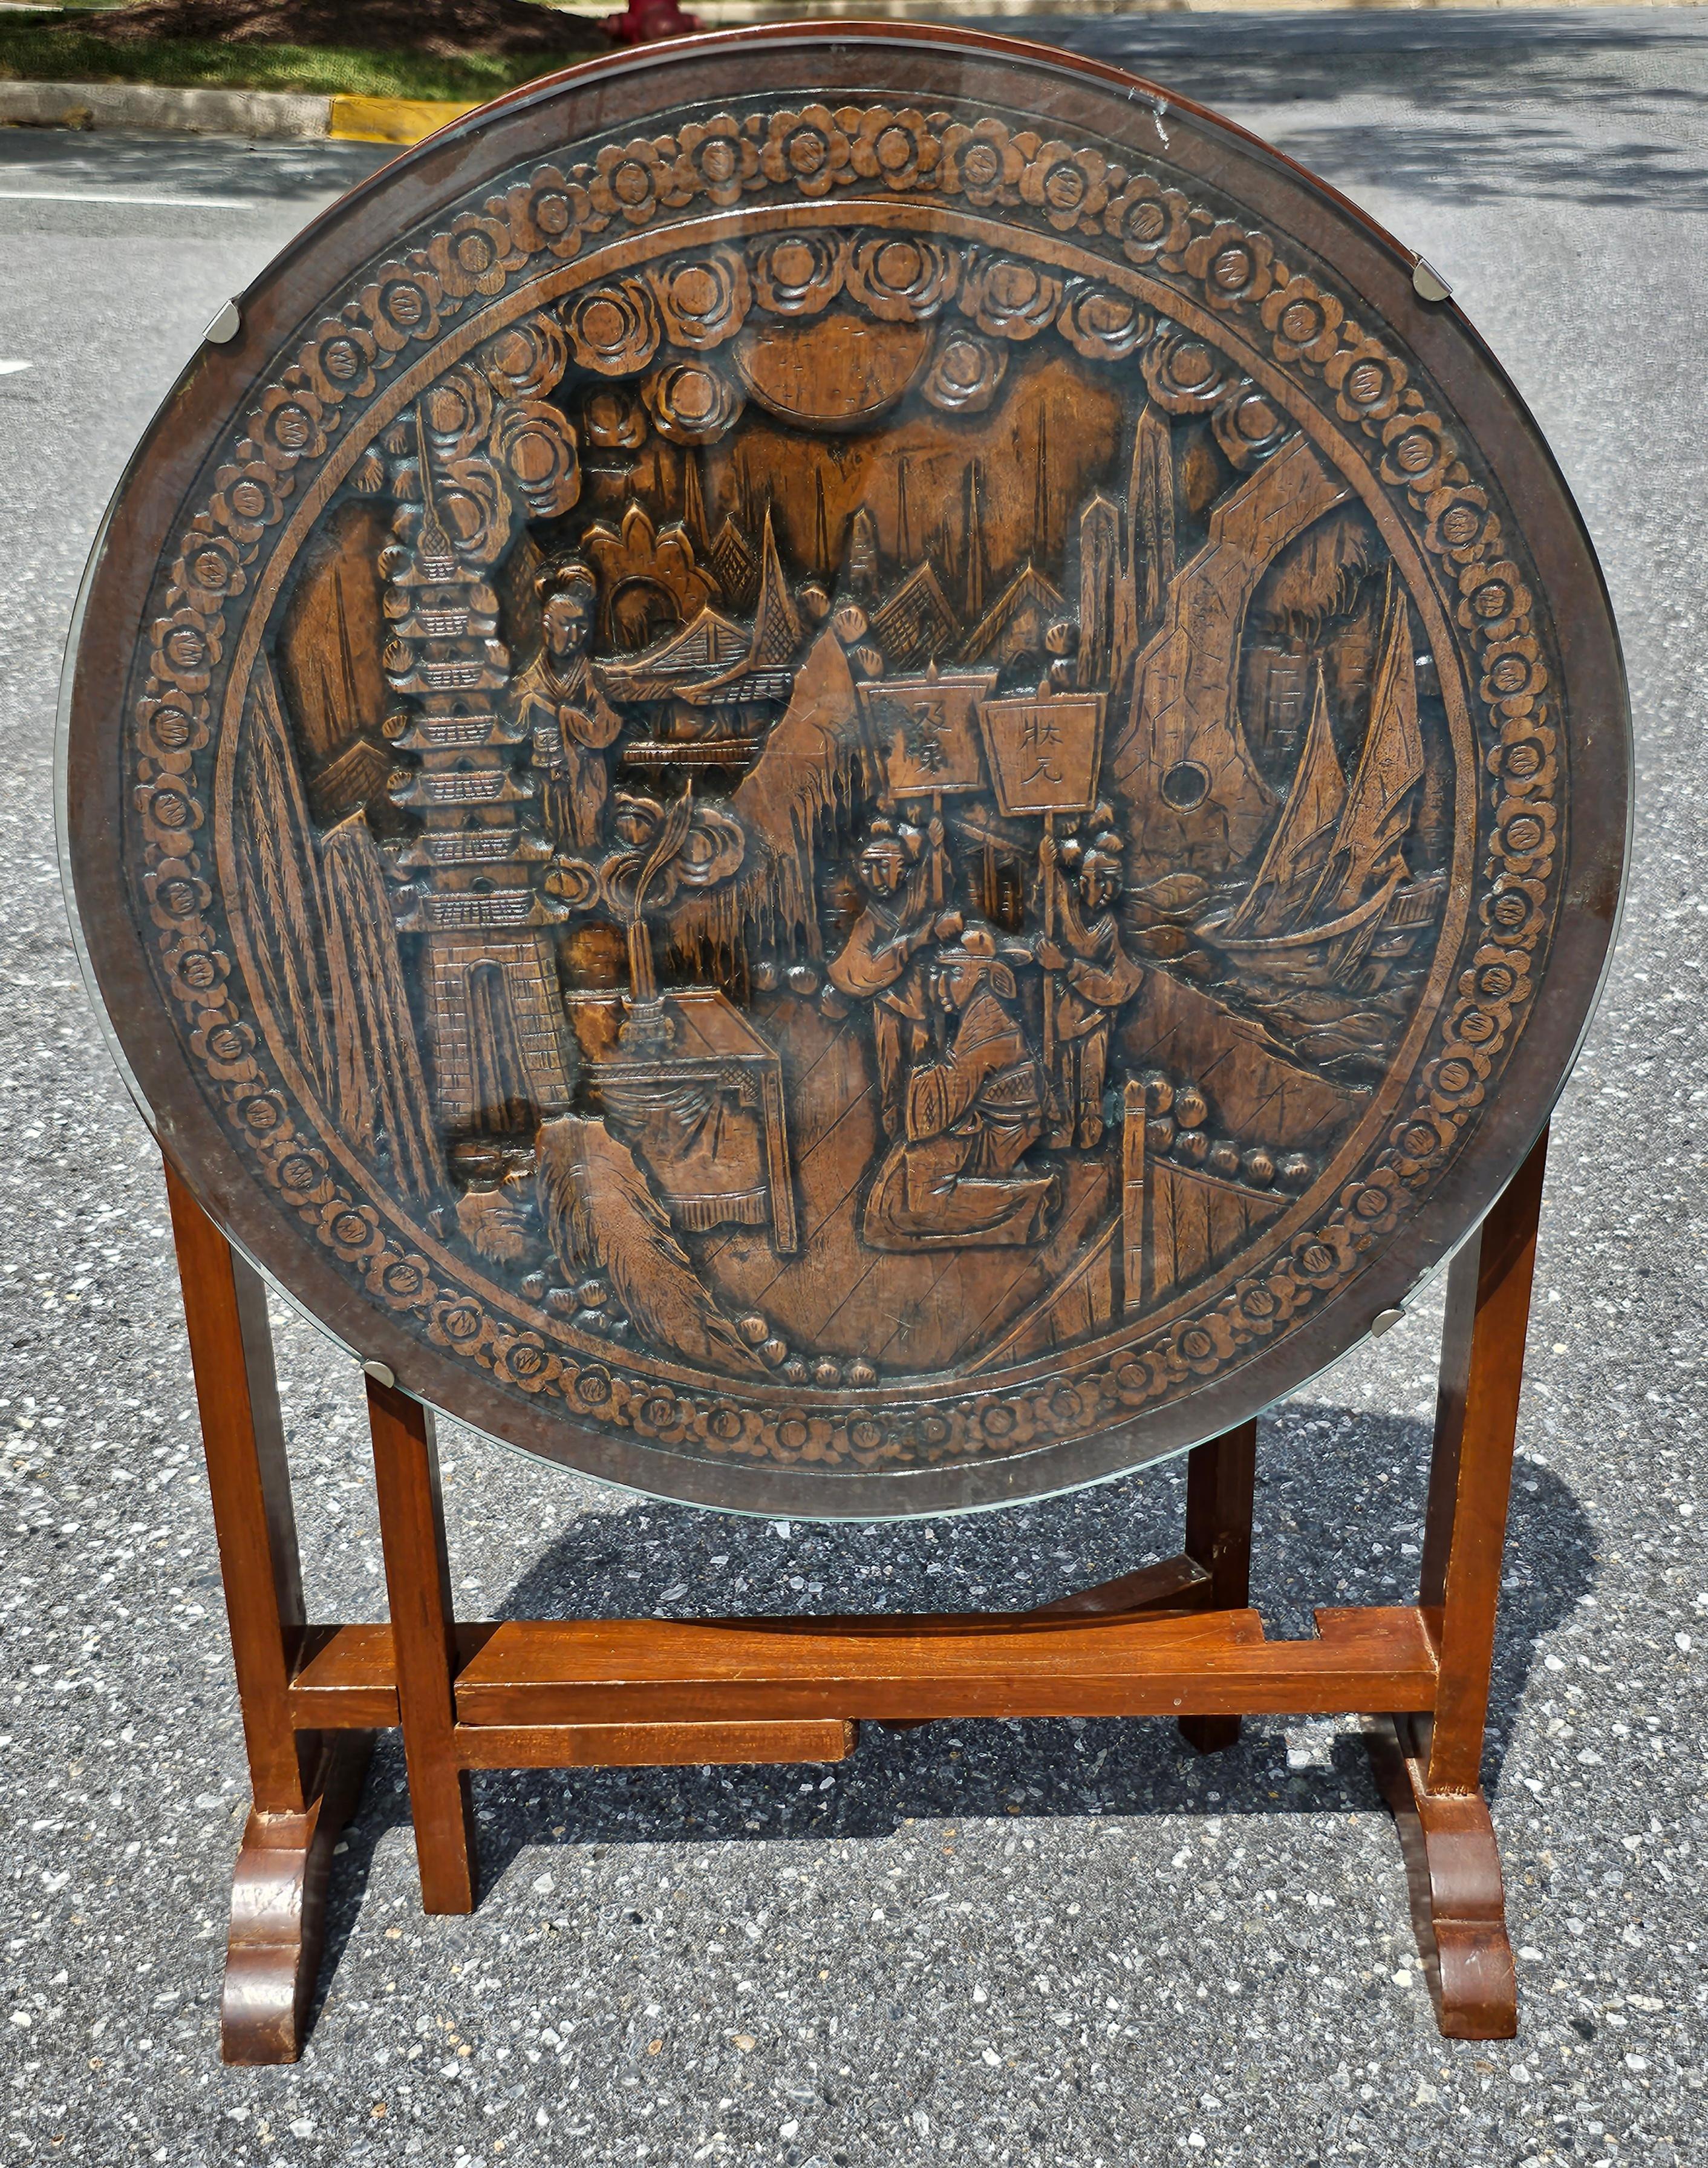 Beautiful hand-carved Chinese Carved Hardwood And Glass Tilt-Top Tea Table or Side Table Measures 24